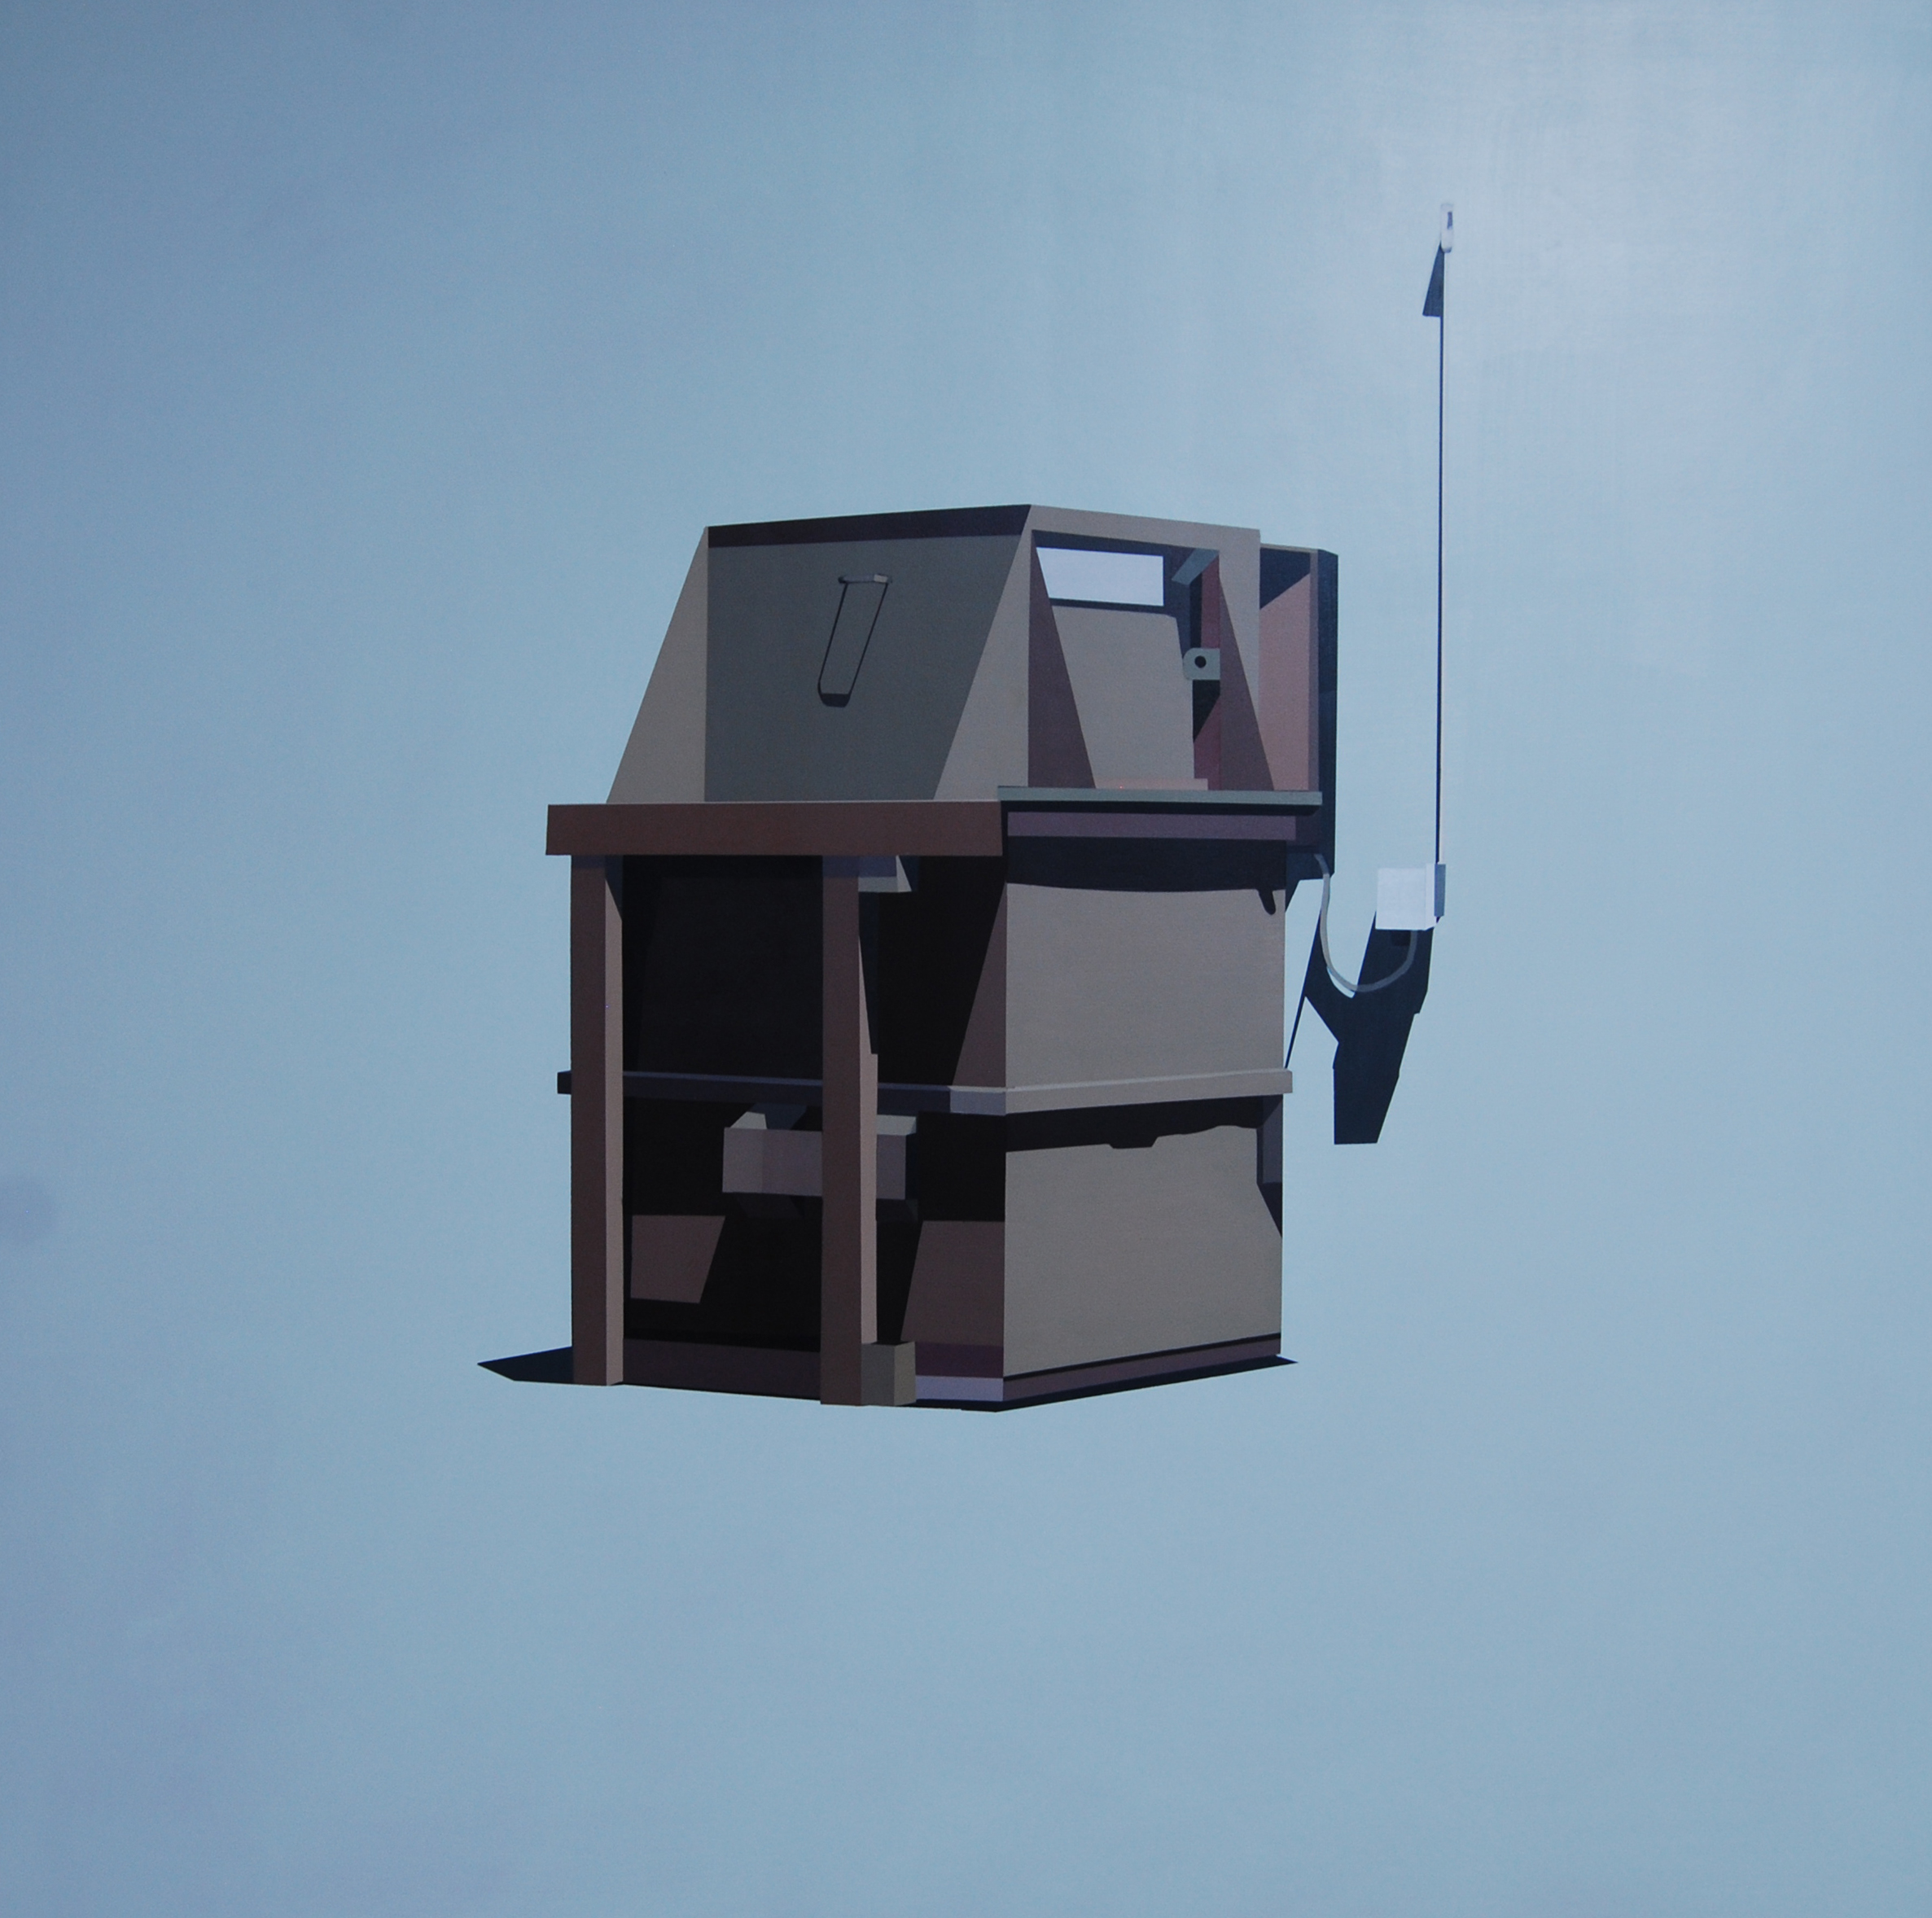   FRENCH KHAKI DUMPSTER IN ANDOVER BLUE GREY   oil on panel | 48" x 48" 2014 